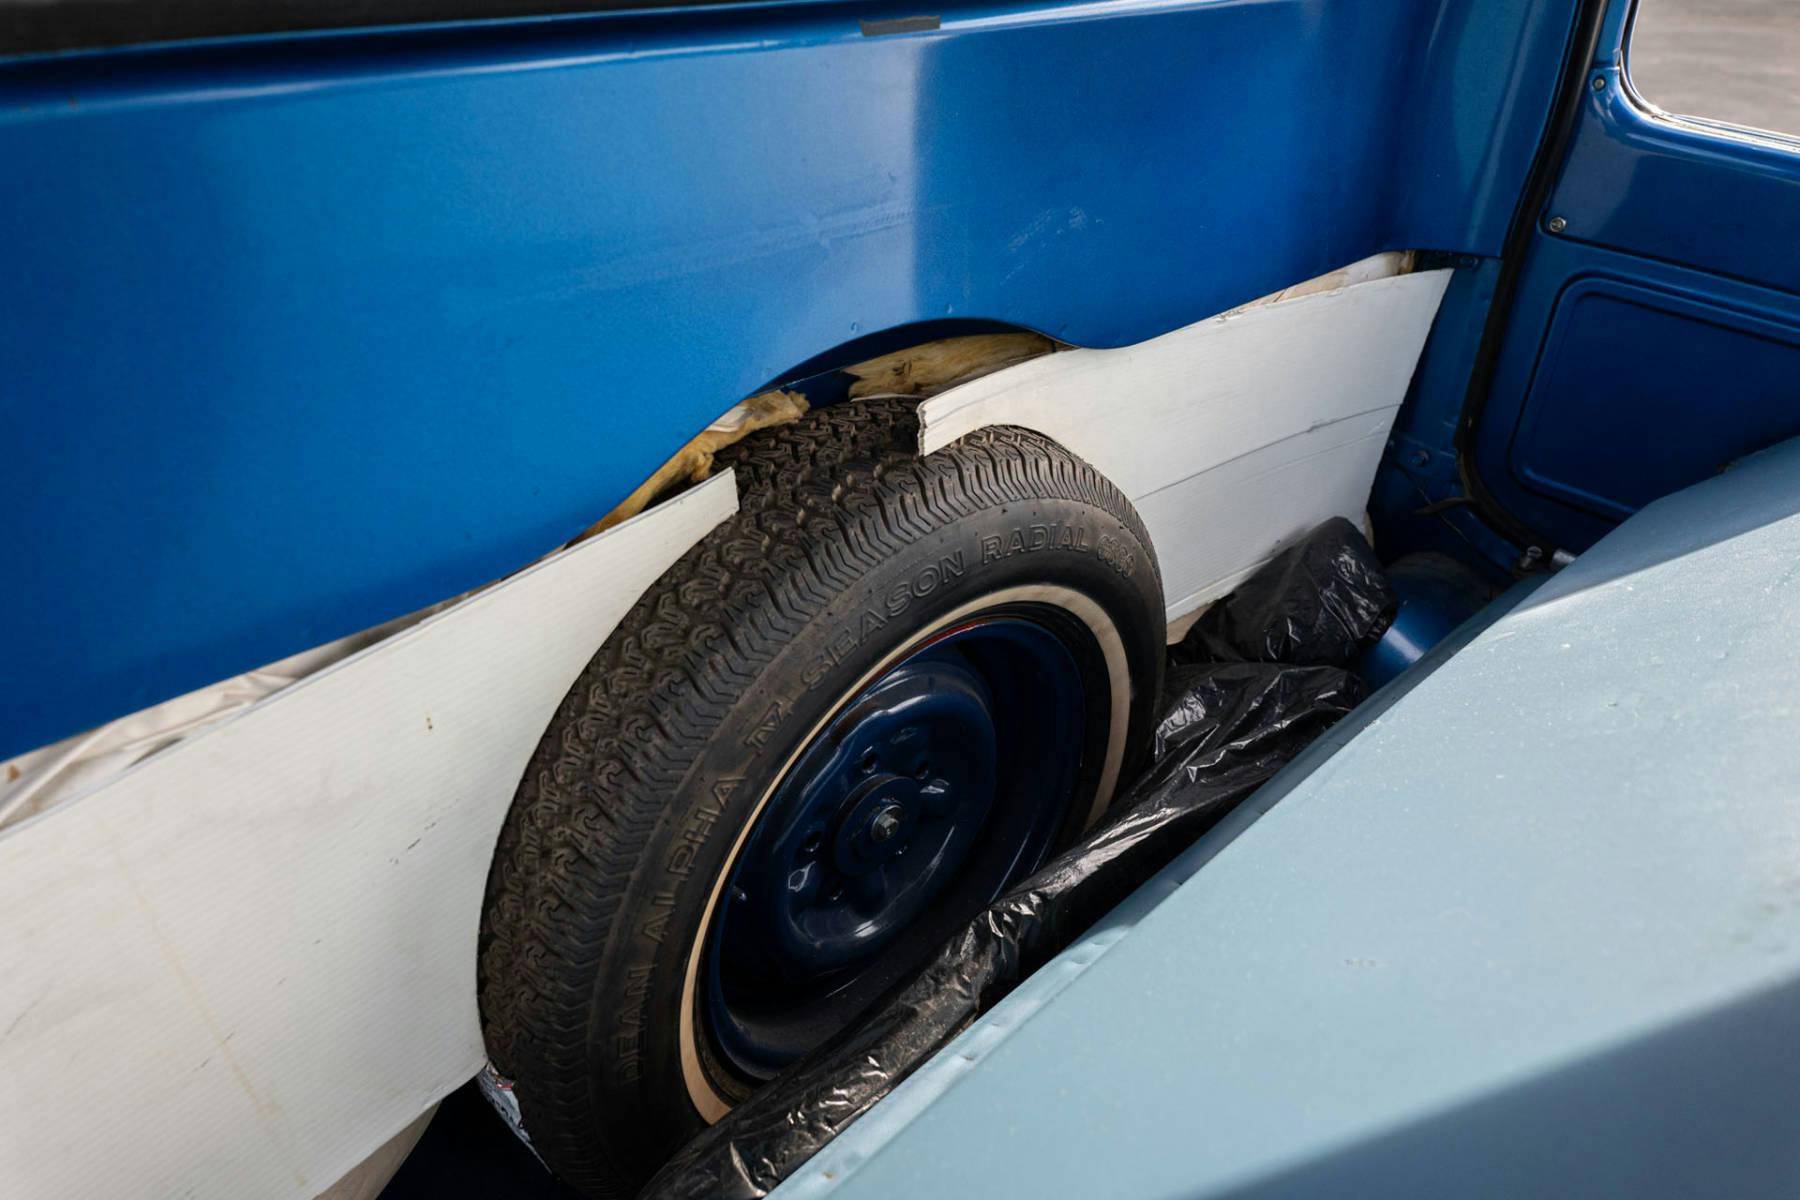 1961 Chevrolet Corvair 95 Rampside Pickup spare tire